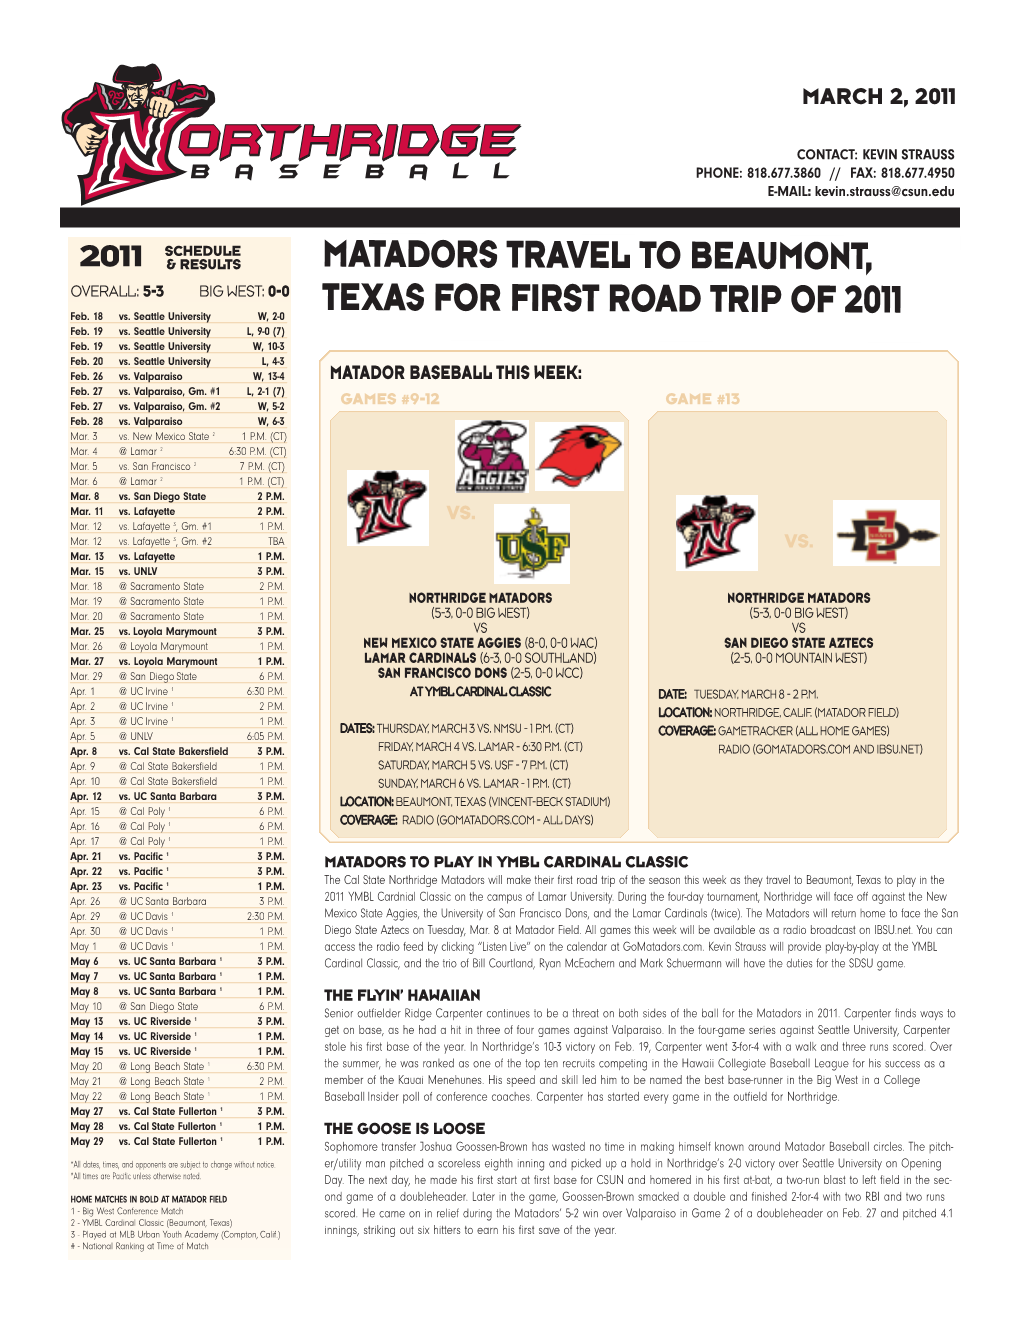 Matadors Travel to Beaumont, Texas For